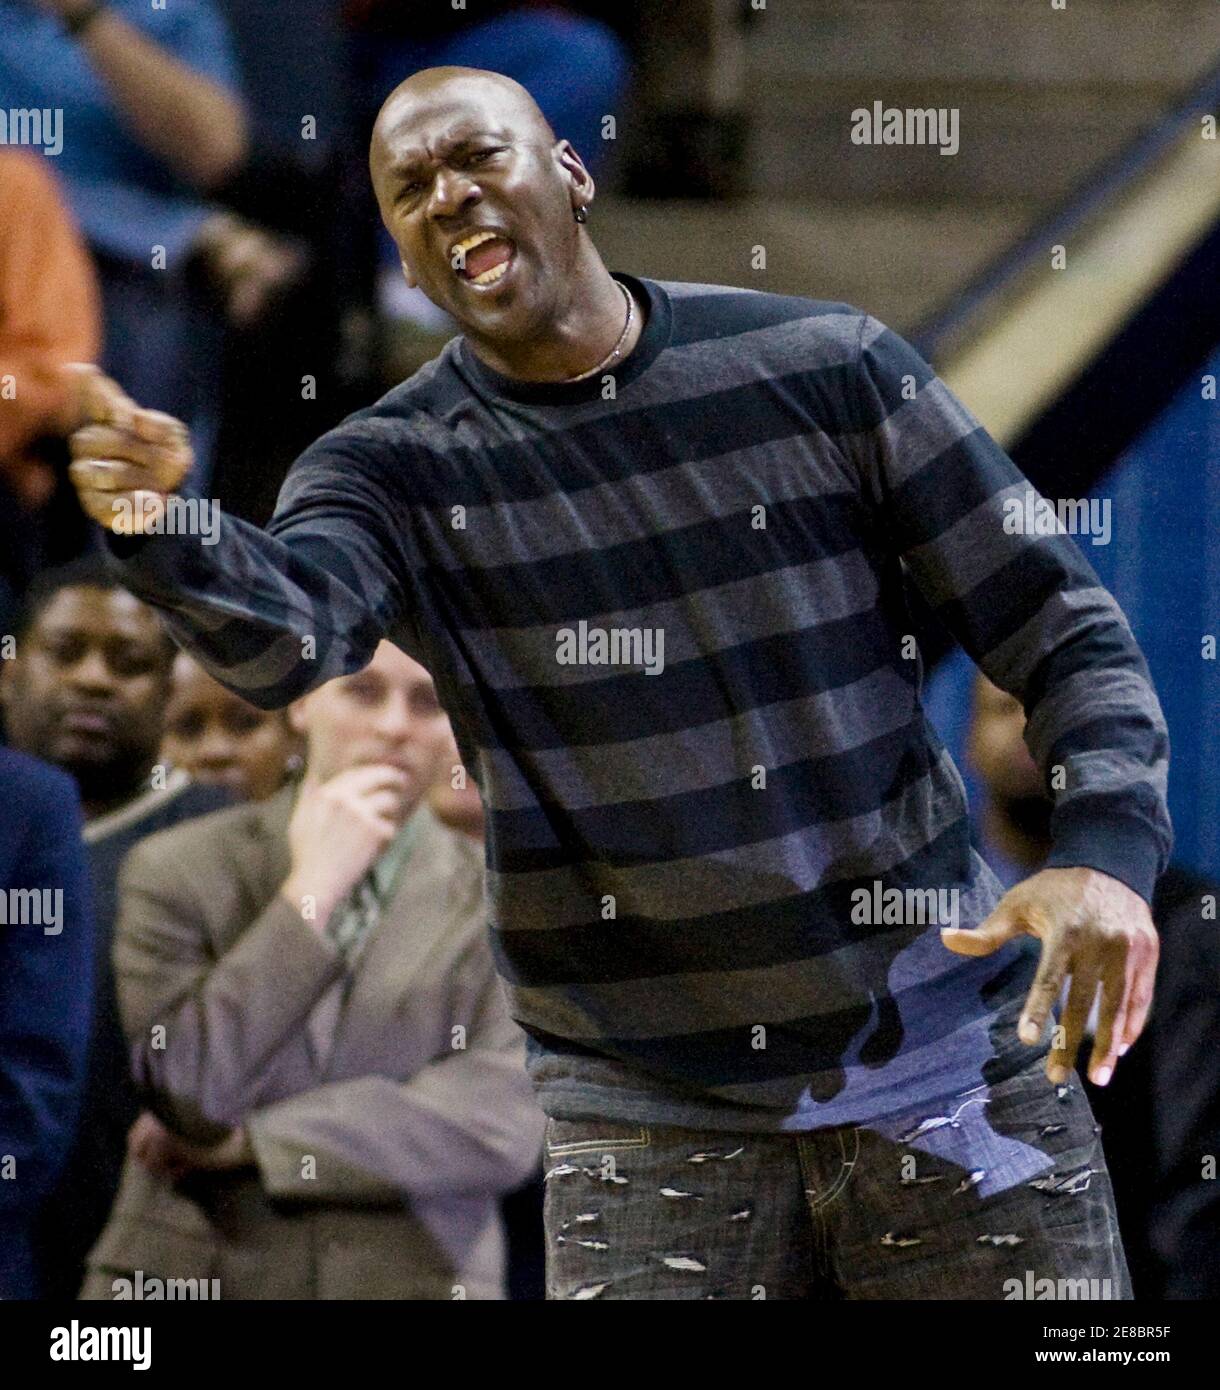 Charlotte Bobcats team owner Michael Jordan yells at the officials against  the Toronto Raptors in the second half during an NBA basketball game in  Charlotte, North Carolina March 29, 2010. REUTERS/Chris Keane (